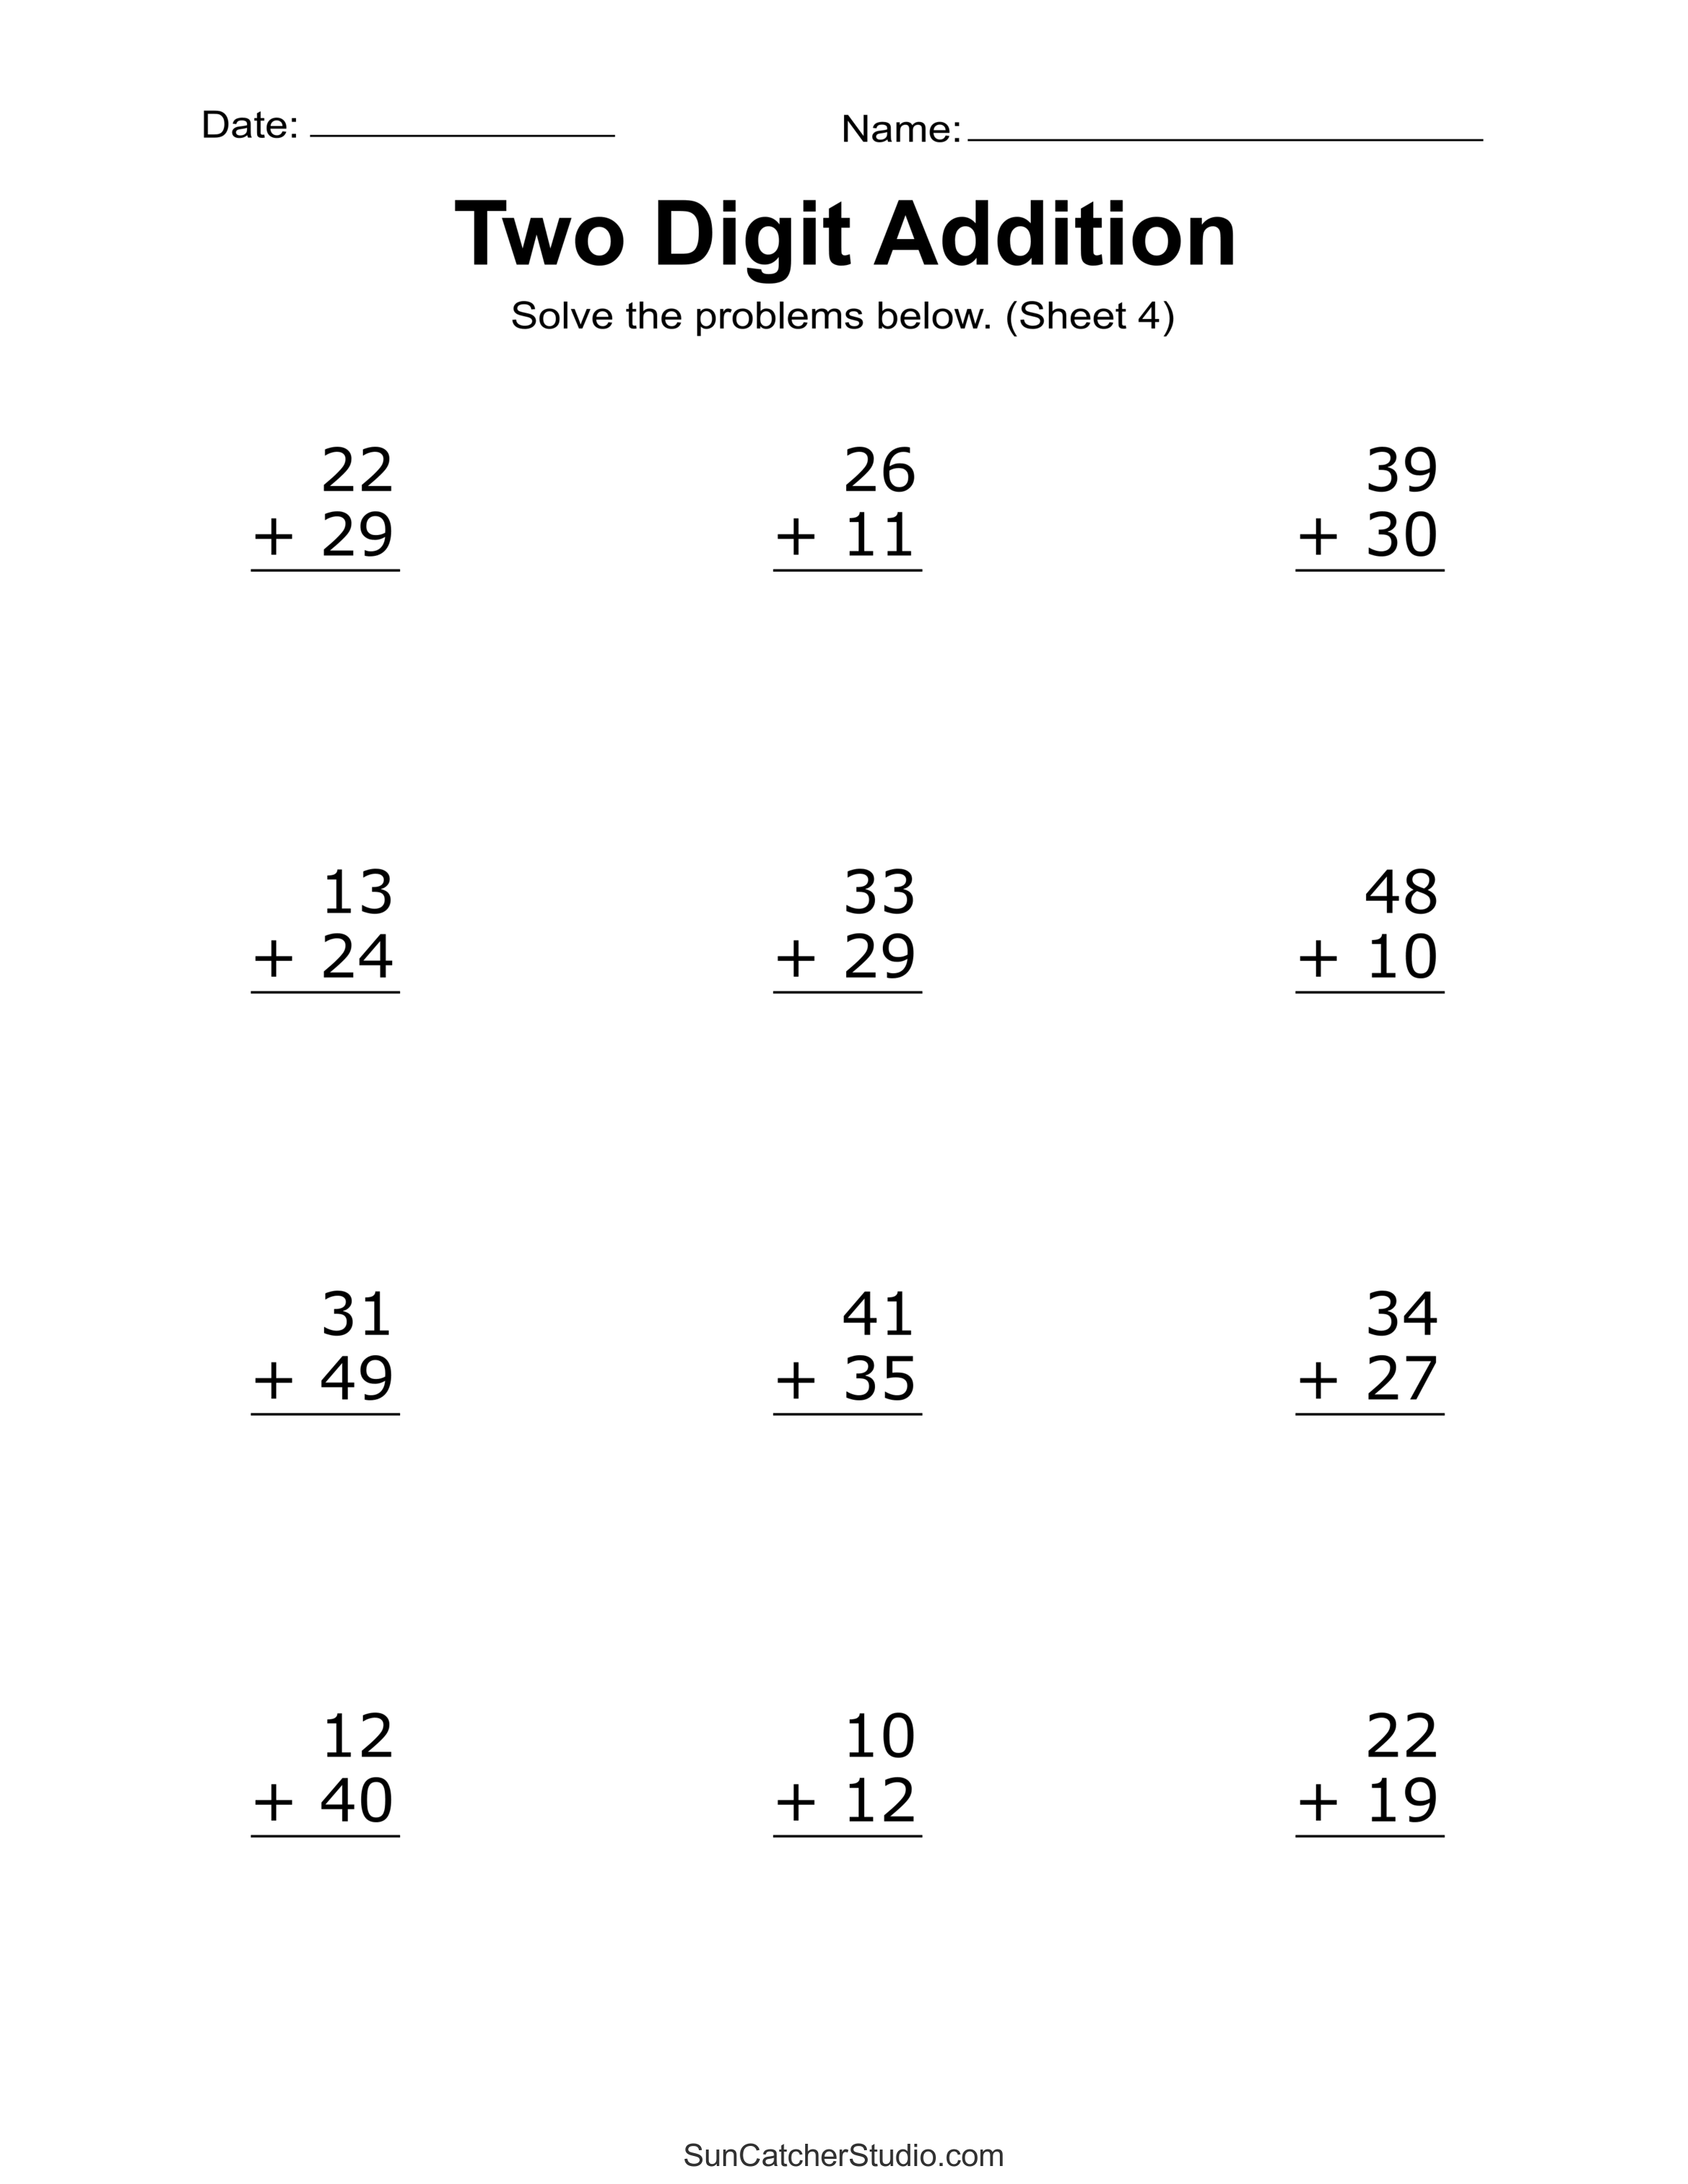 two-digit-addition-worksheets-printable-2-digit-problems-diy-projects-patterns-monograms